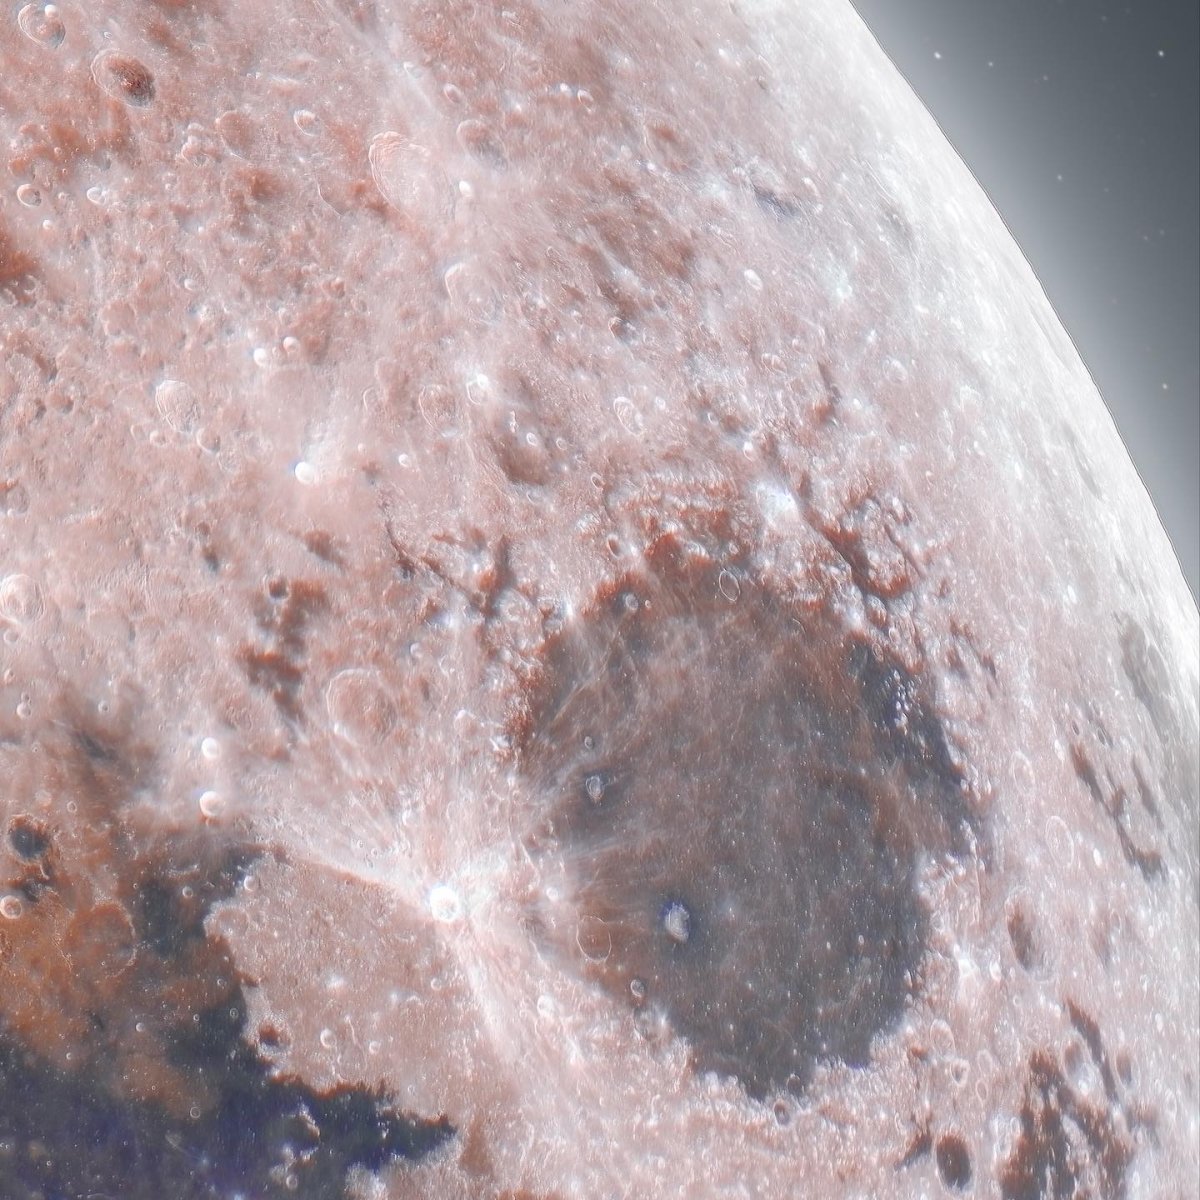 New highly detailed photos of the moon taken #5